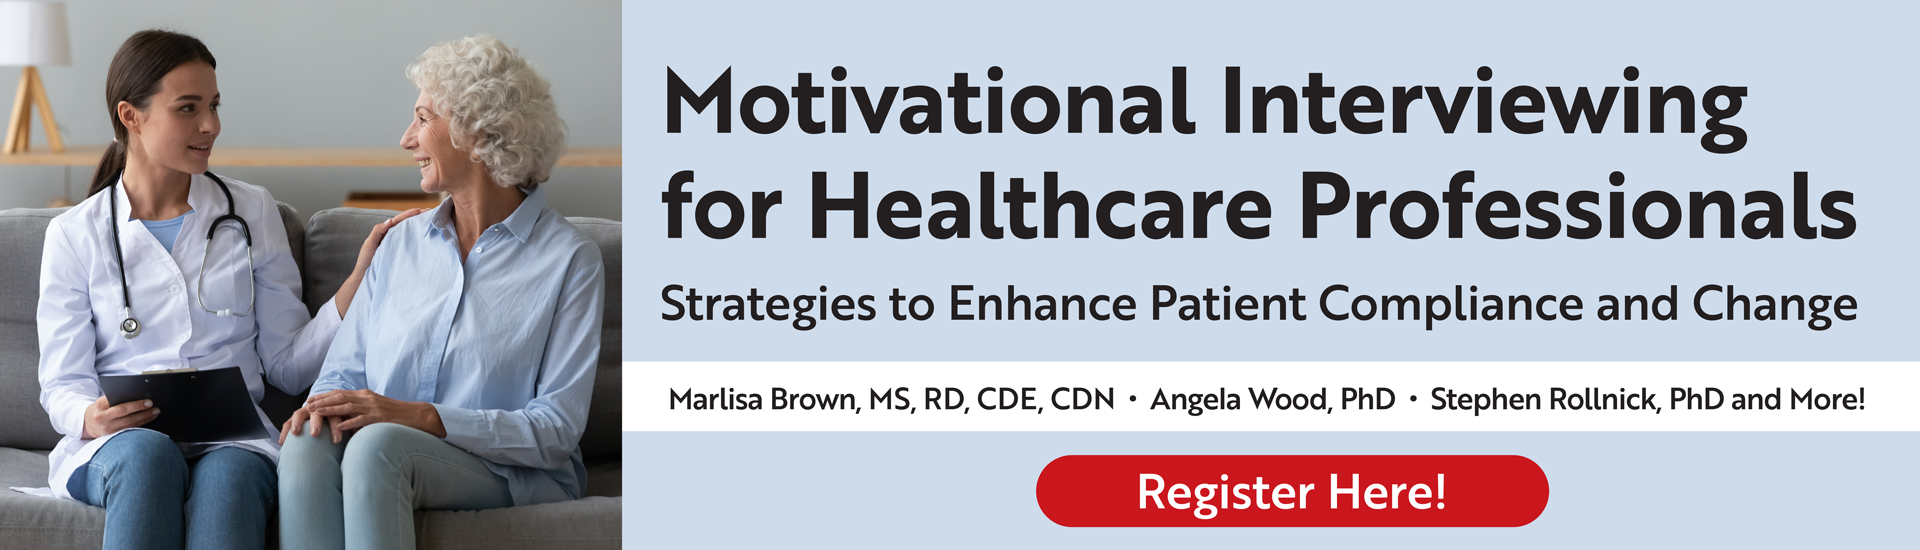 Motivational Interviewing for Healthcare Professionals: Strategies to Enhance Patient Compliance and Change